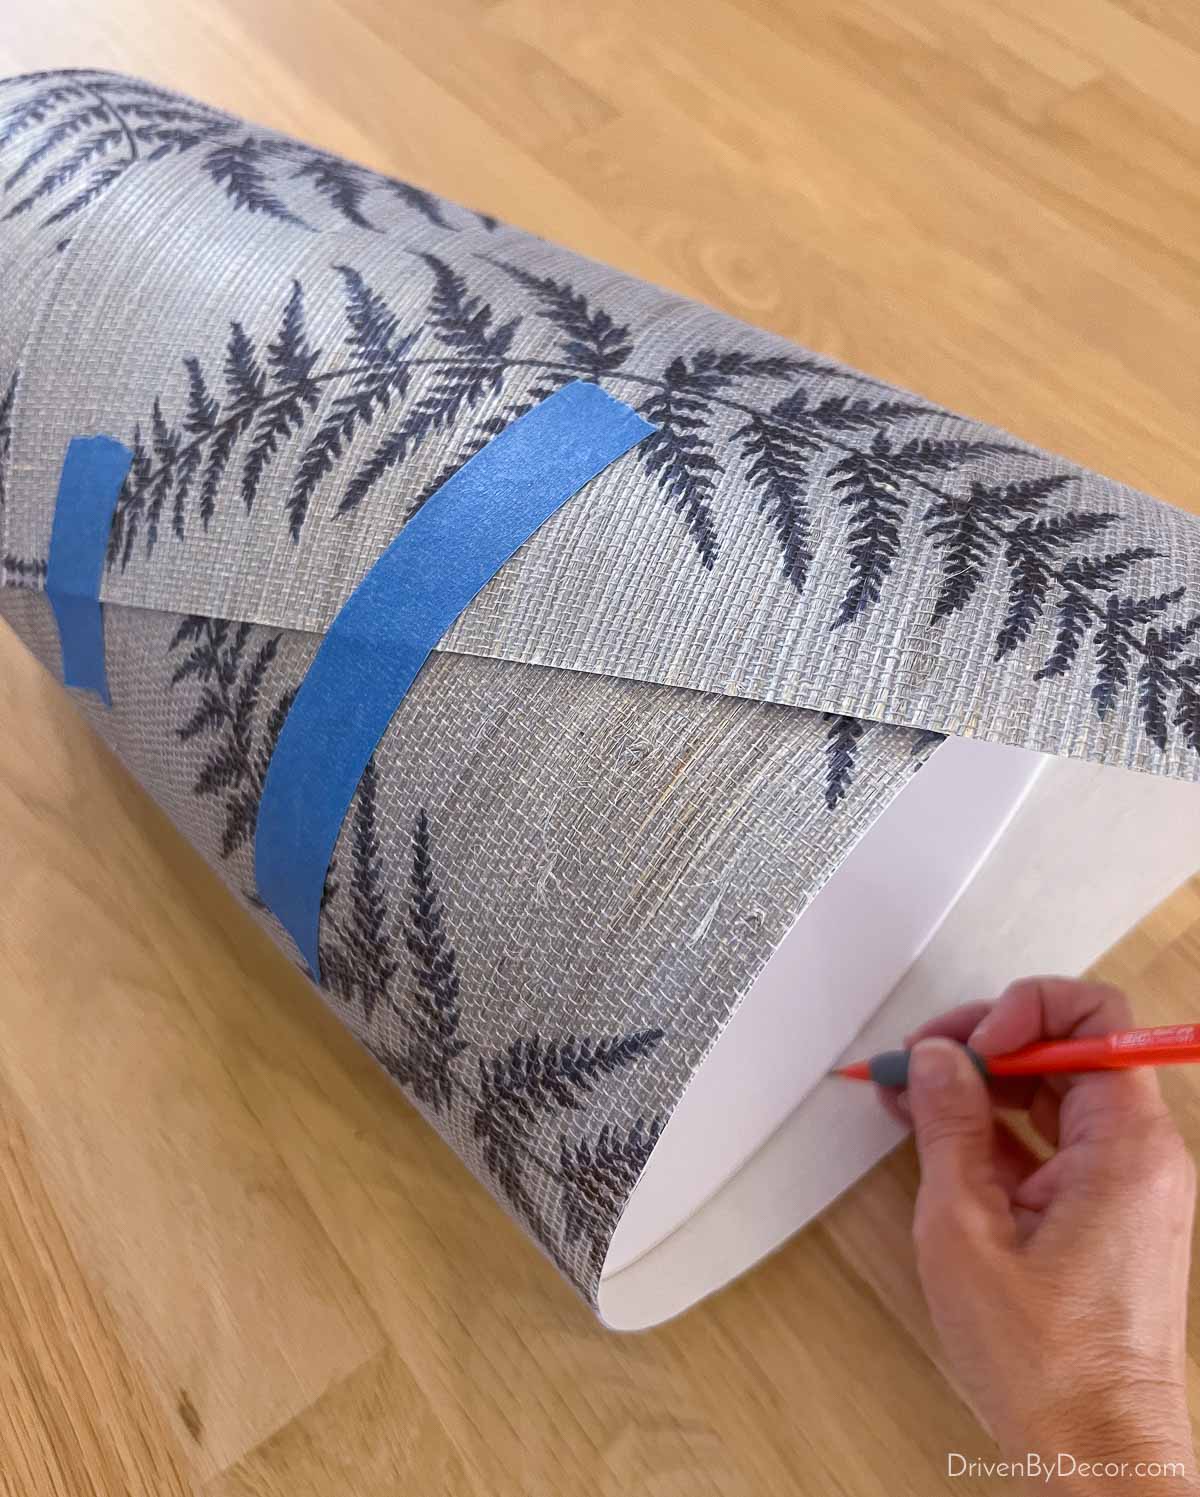 Grasscloth wallpaper wrapped around a waste basket to cut down to size